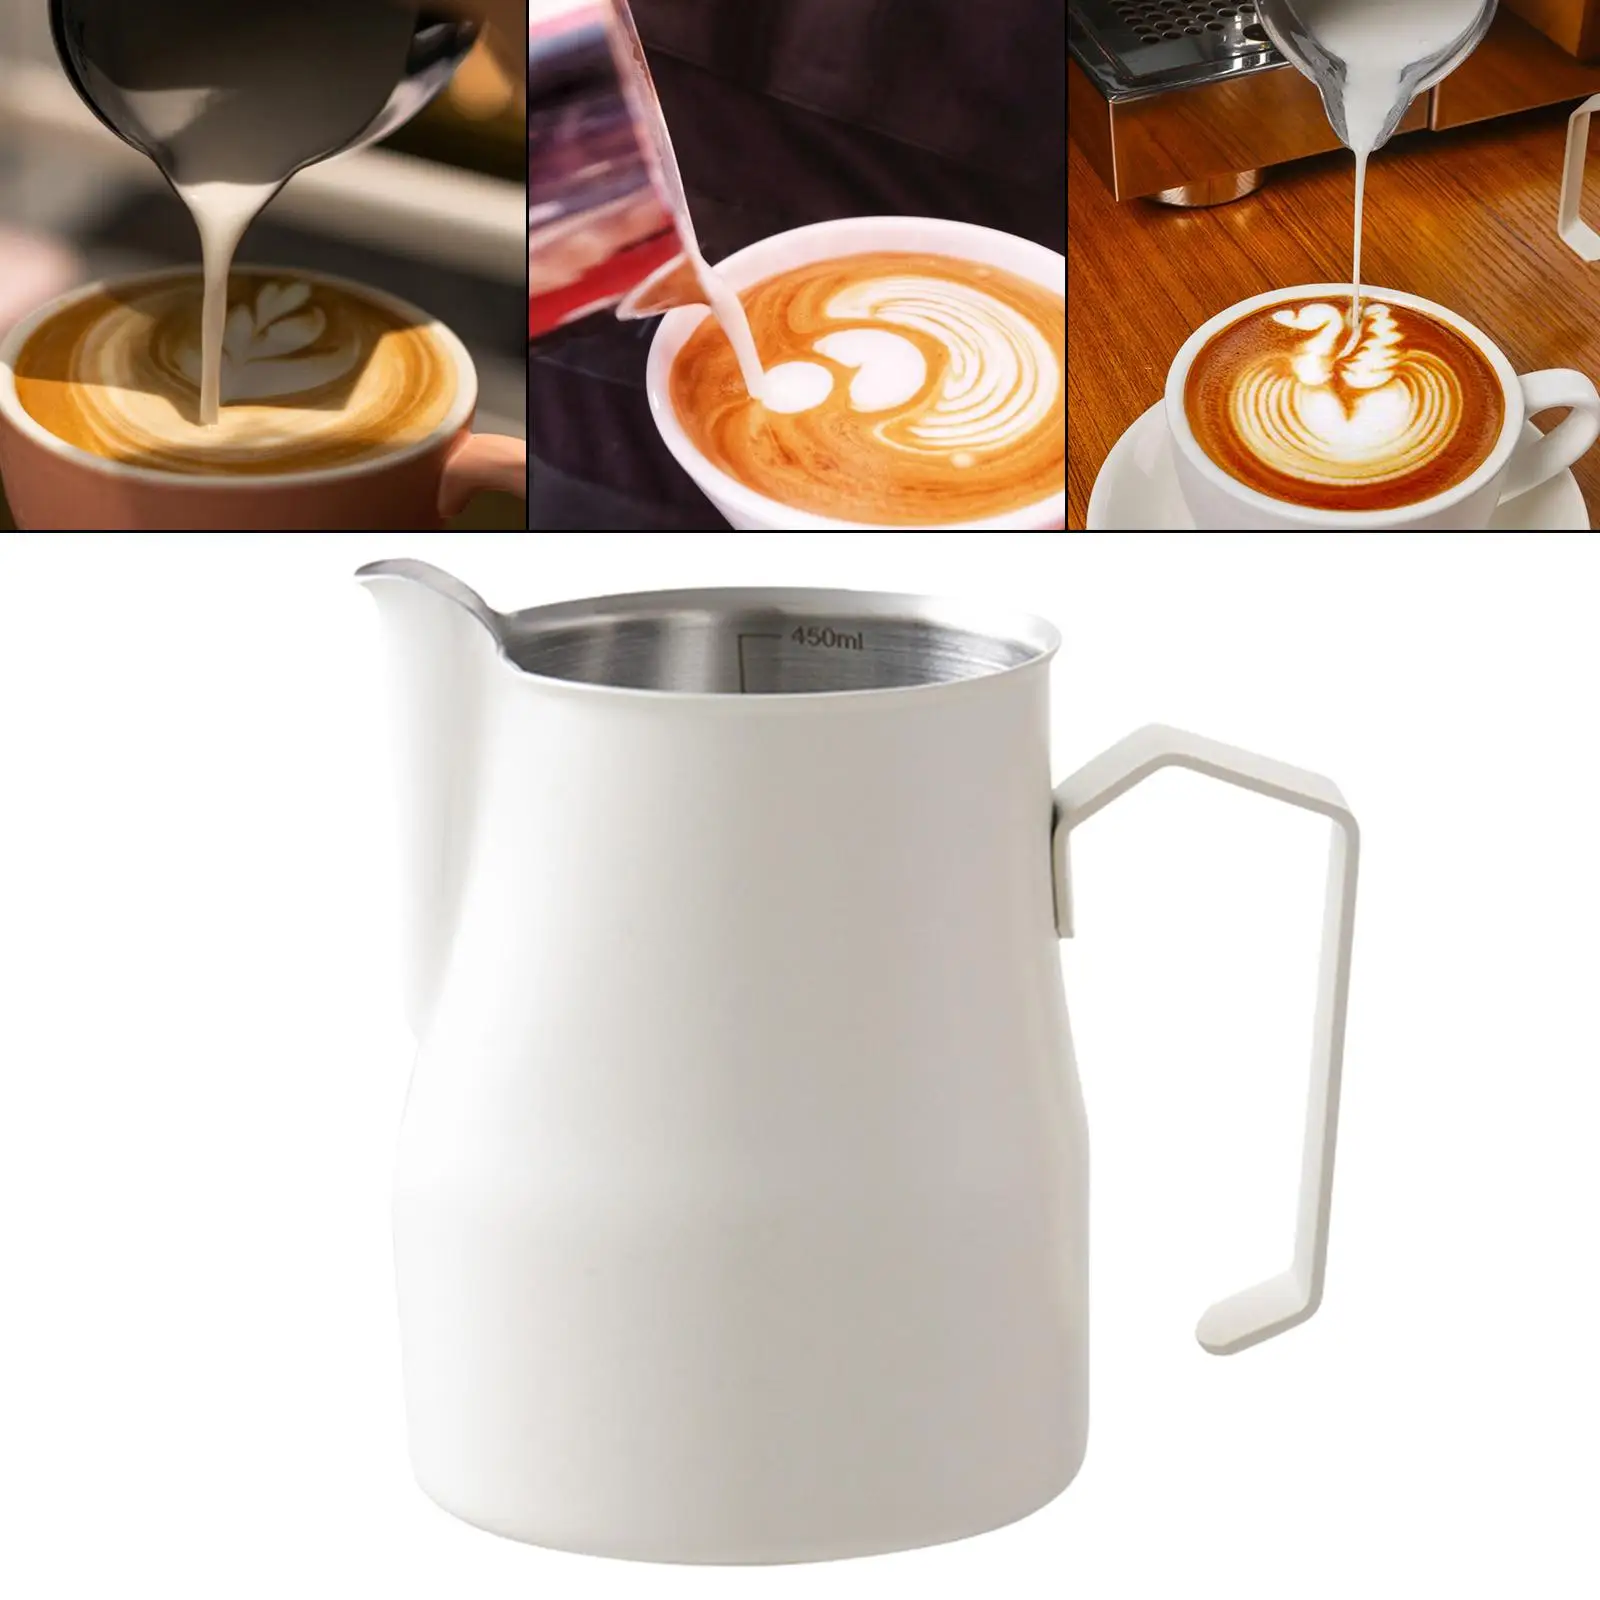 Milk Frothing Pitcher Jug Stainless Steel Creamer Frothing Pitcher Milk Frother Cup Espresso Steaming Pitcher for Hot Chocolate